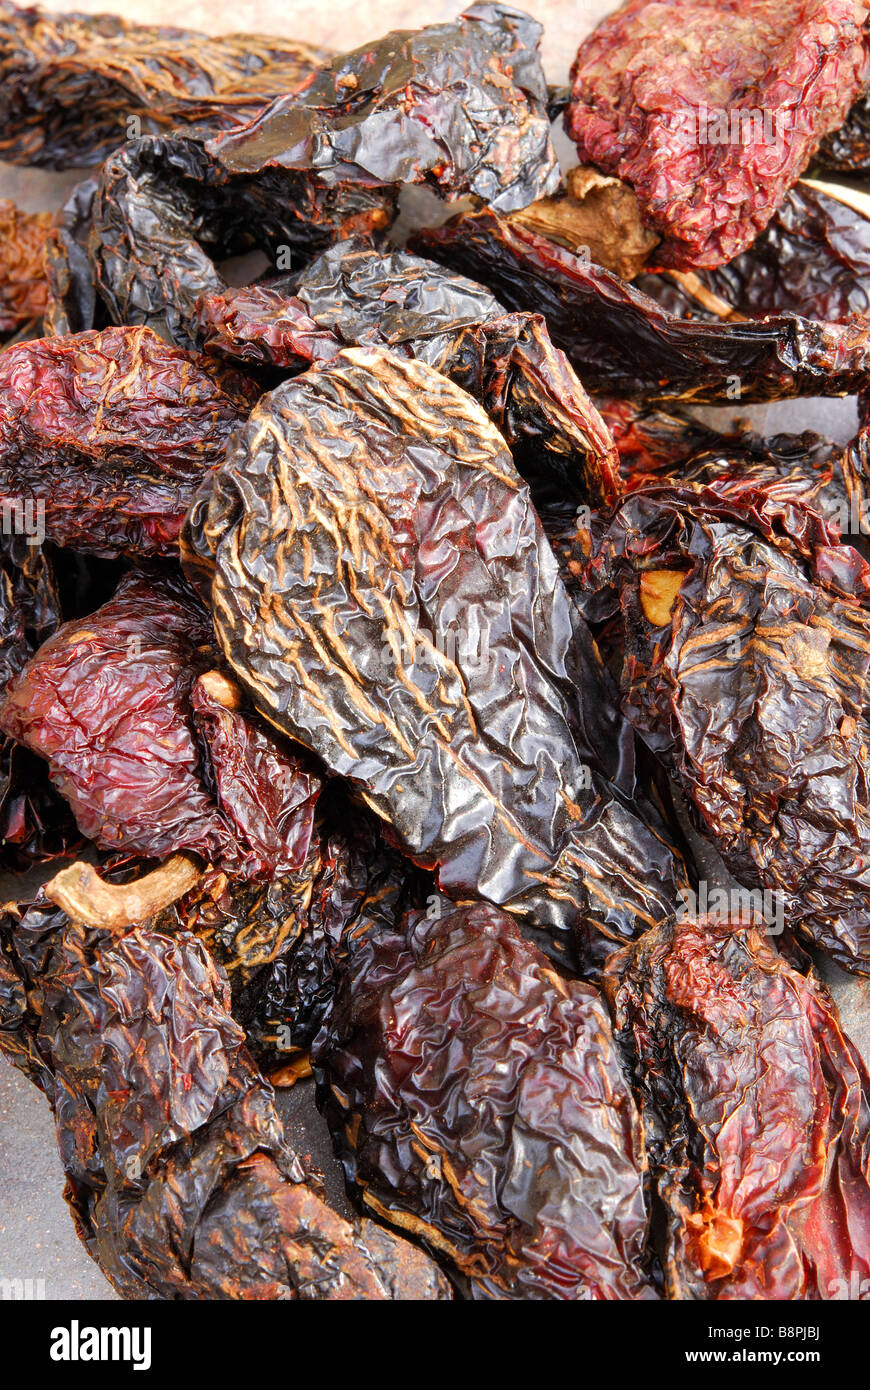 Chipotle 'Moritas'. Dried, smoked jalapeno chillies used to add a smoky heat to Mexican and TexMex dishes. Stock Photo